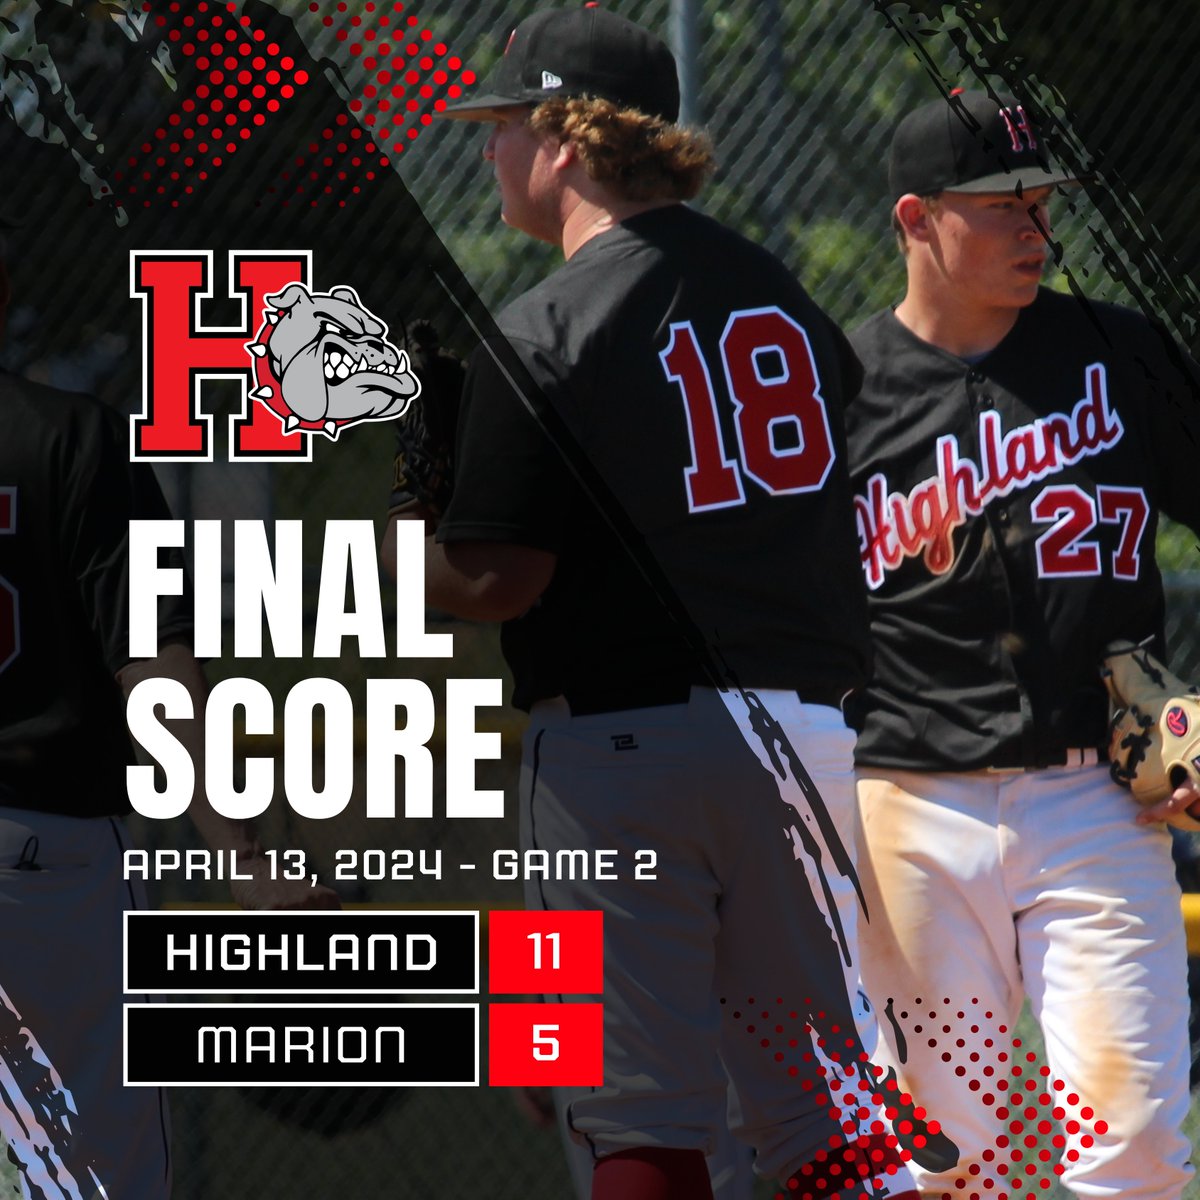 The Bulldogs pounded out 13 hits and 11 runs to beat Marion 11-5 in game two on Saturday. Alex Howard struck out 6 in four innings of work on the mound. @GarrinStone stayed hot with 4 hits and 3 RBIs, @ChaseKnebel with 2 hits and 2 RBIs and @TreyKoishor with 2 hits and 1 RBI.